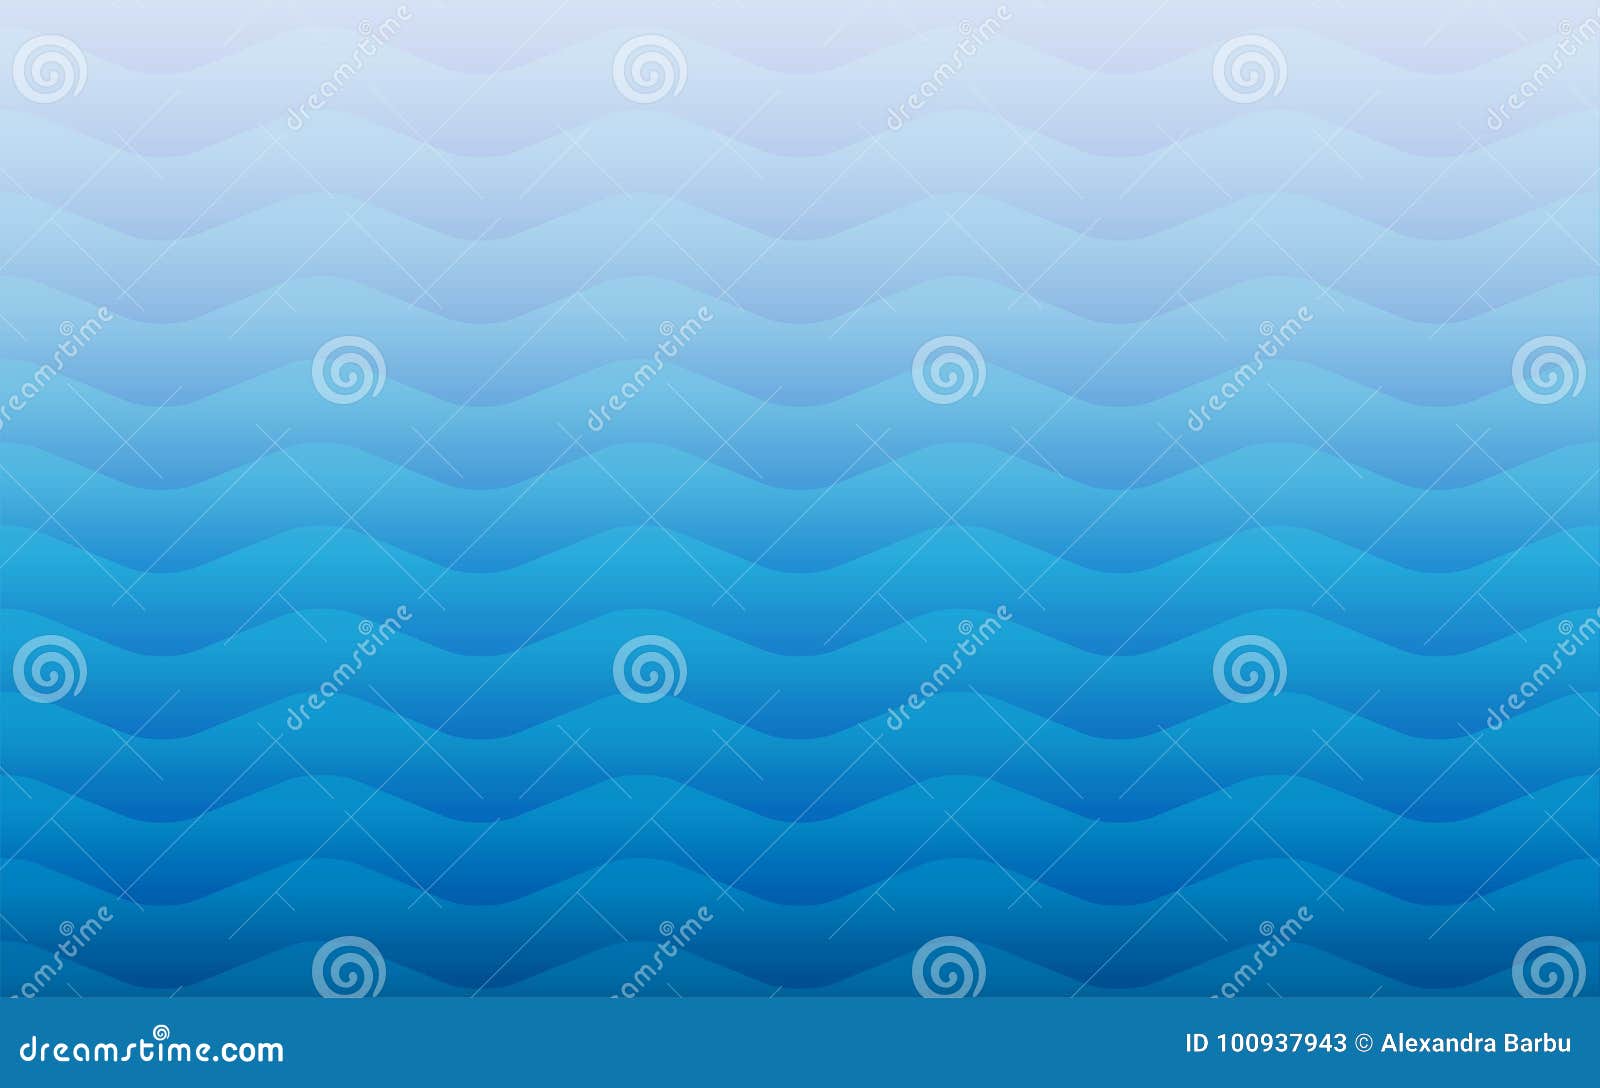 water waves geometric seamless repetitive  pattern texture